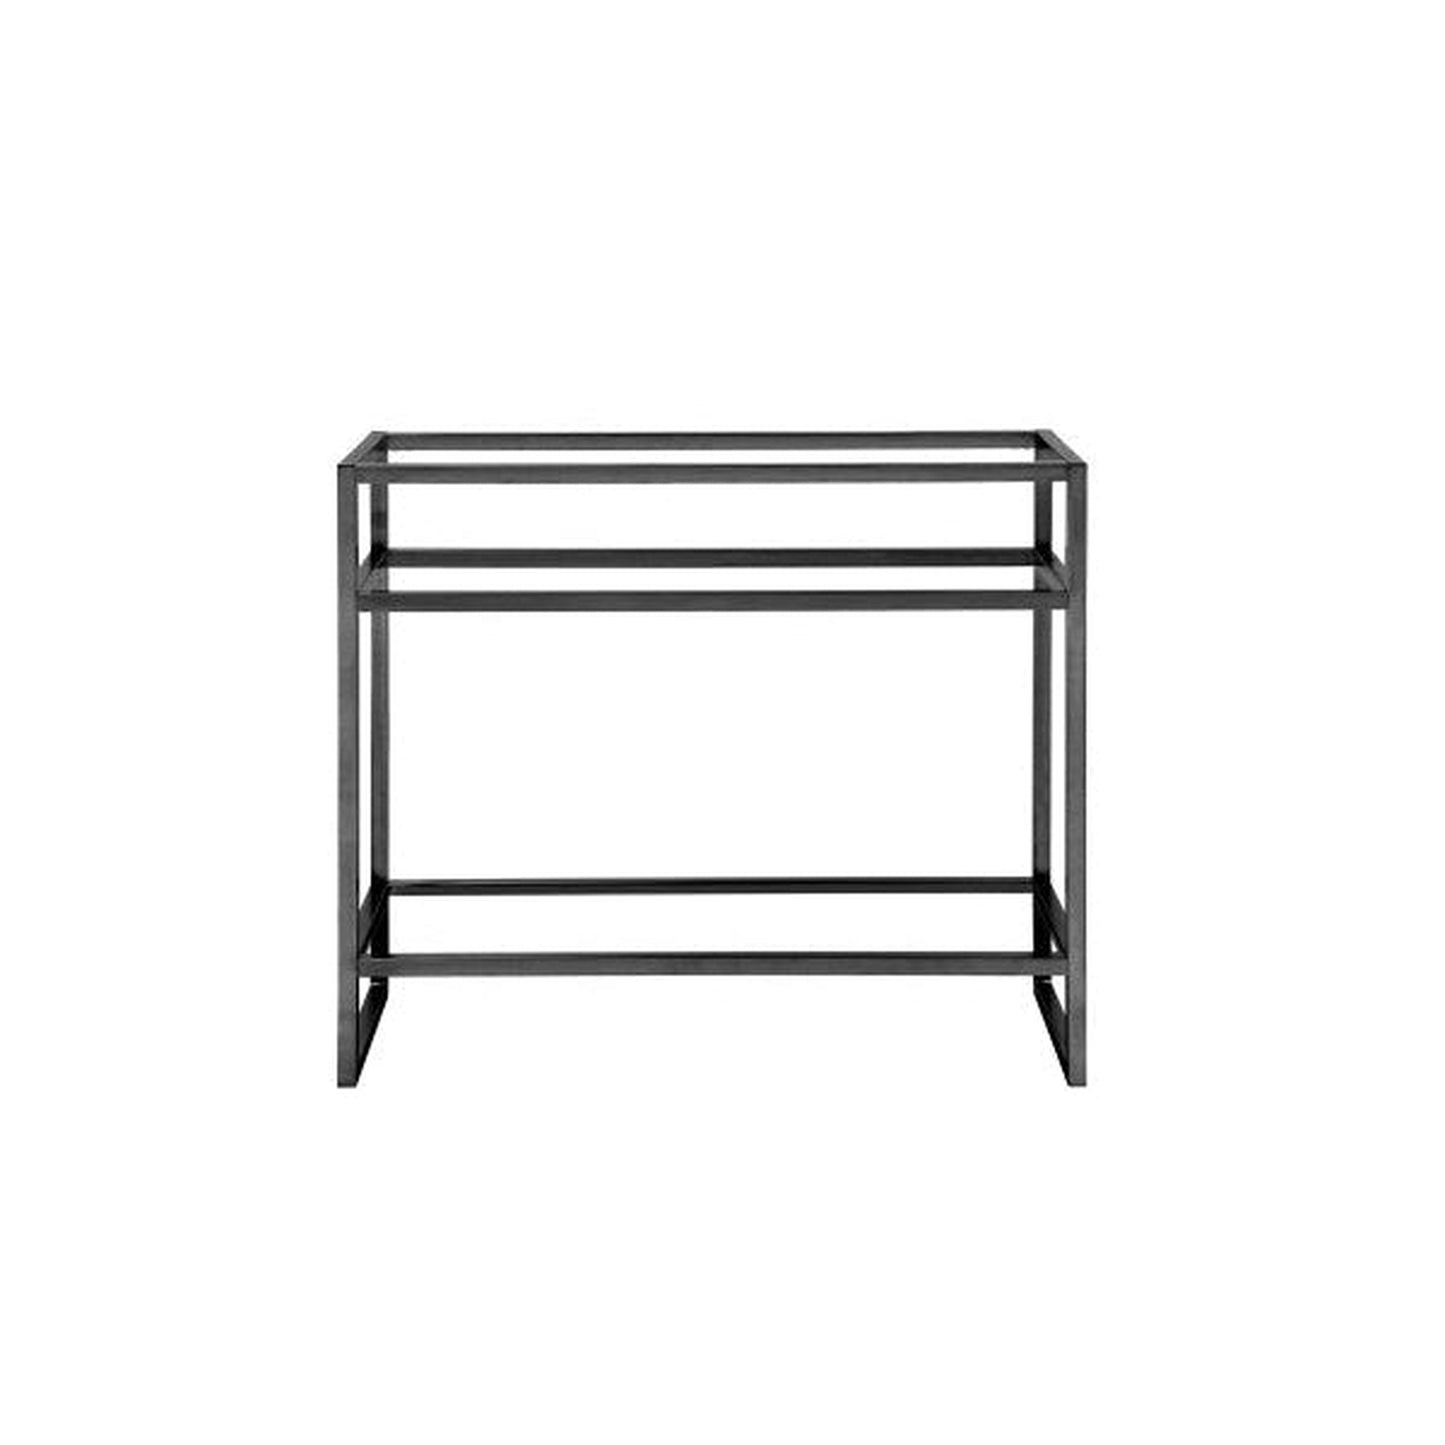 James Martin Boston 39" Double Matte Black Stainless Steel Sink Console Stand